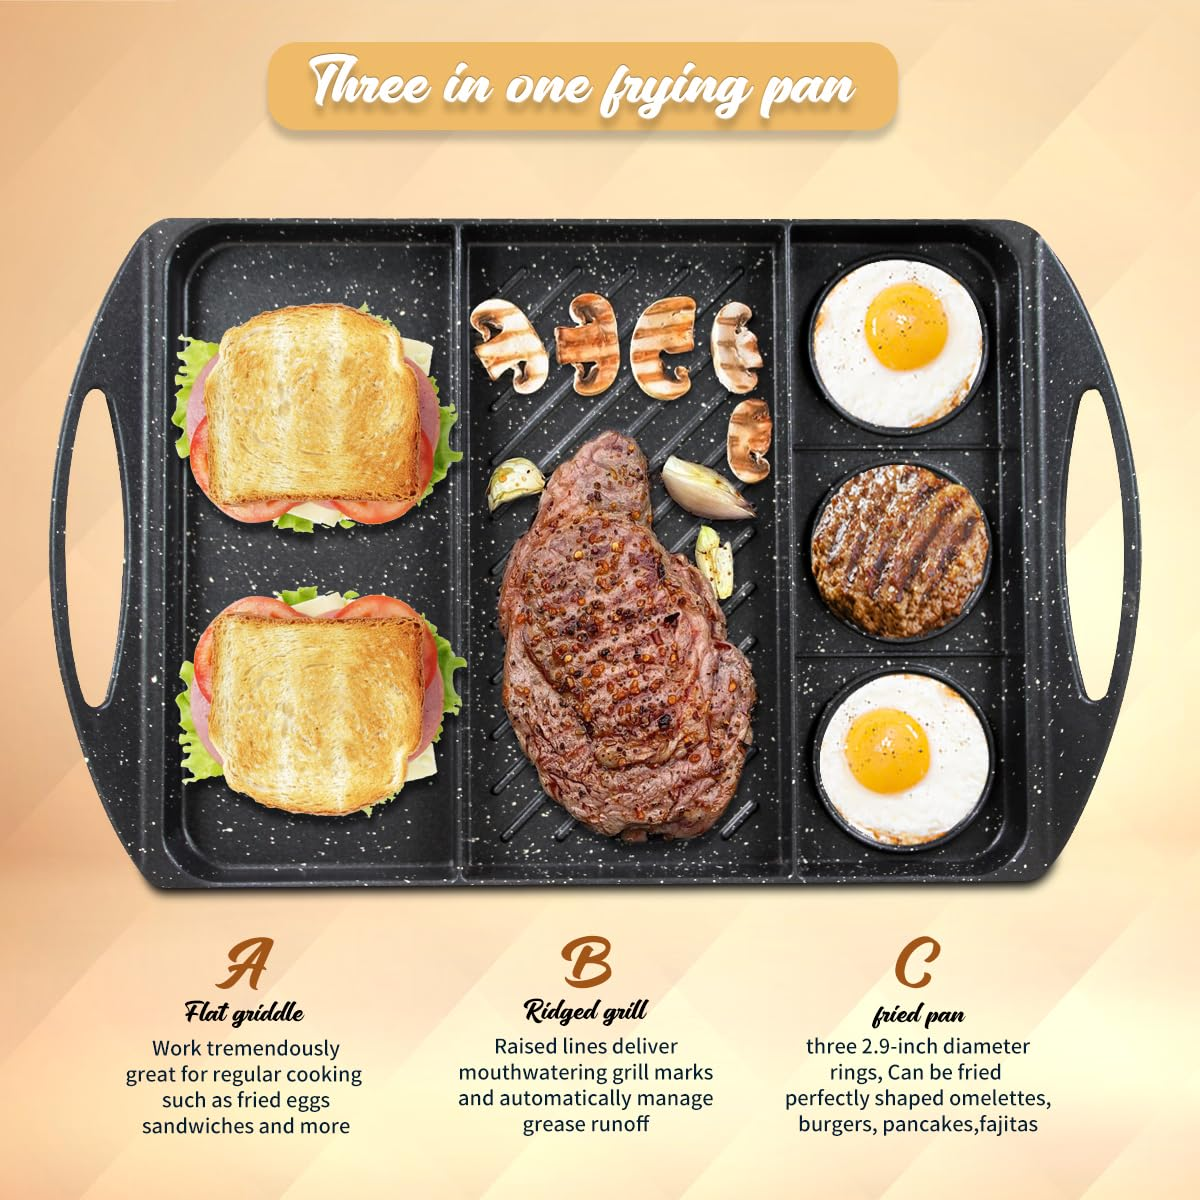 3 in 1 Flat Top Grill Griddle,Griddle Pan for Stove Top Double Burner Grill,Aluminum Pancake Griddle,Non-Stick Top Griddle Grill Compatible with All Stoves,Griddle For Camping/Indoor,Dishwasher Safe